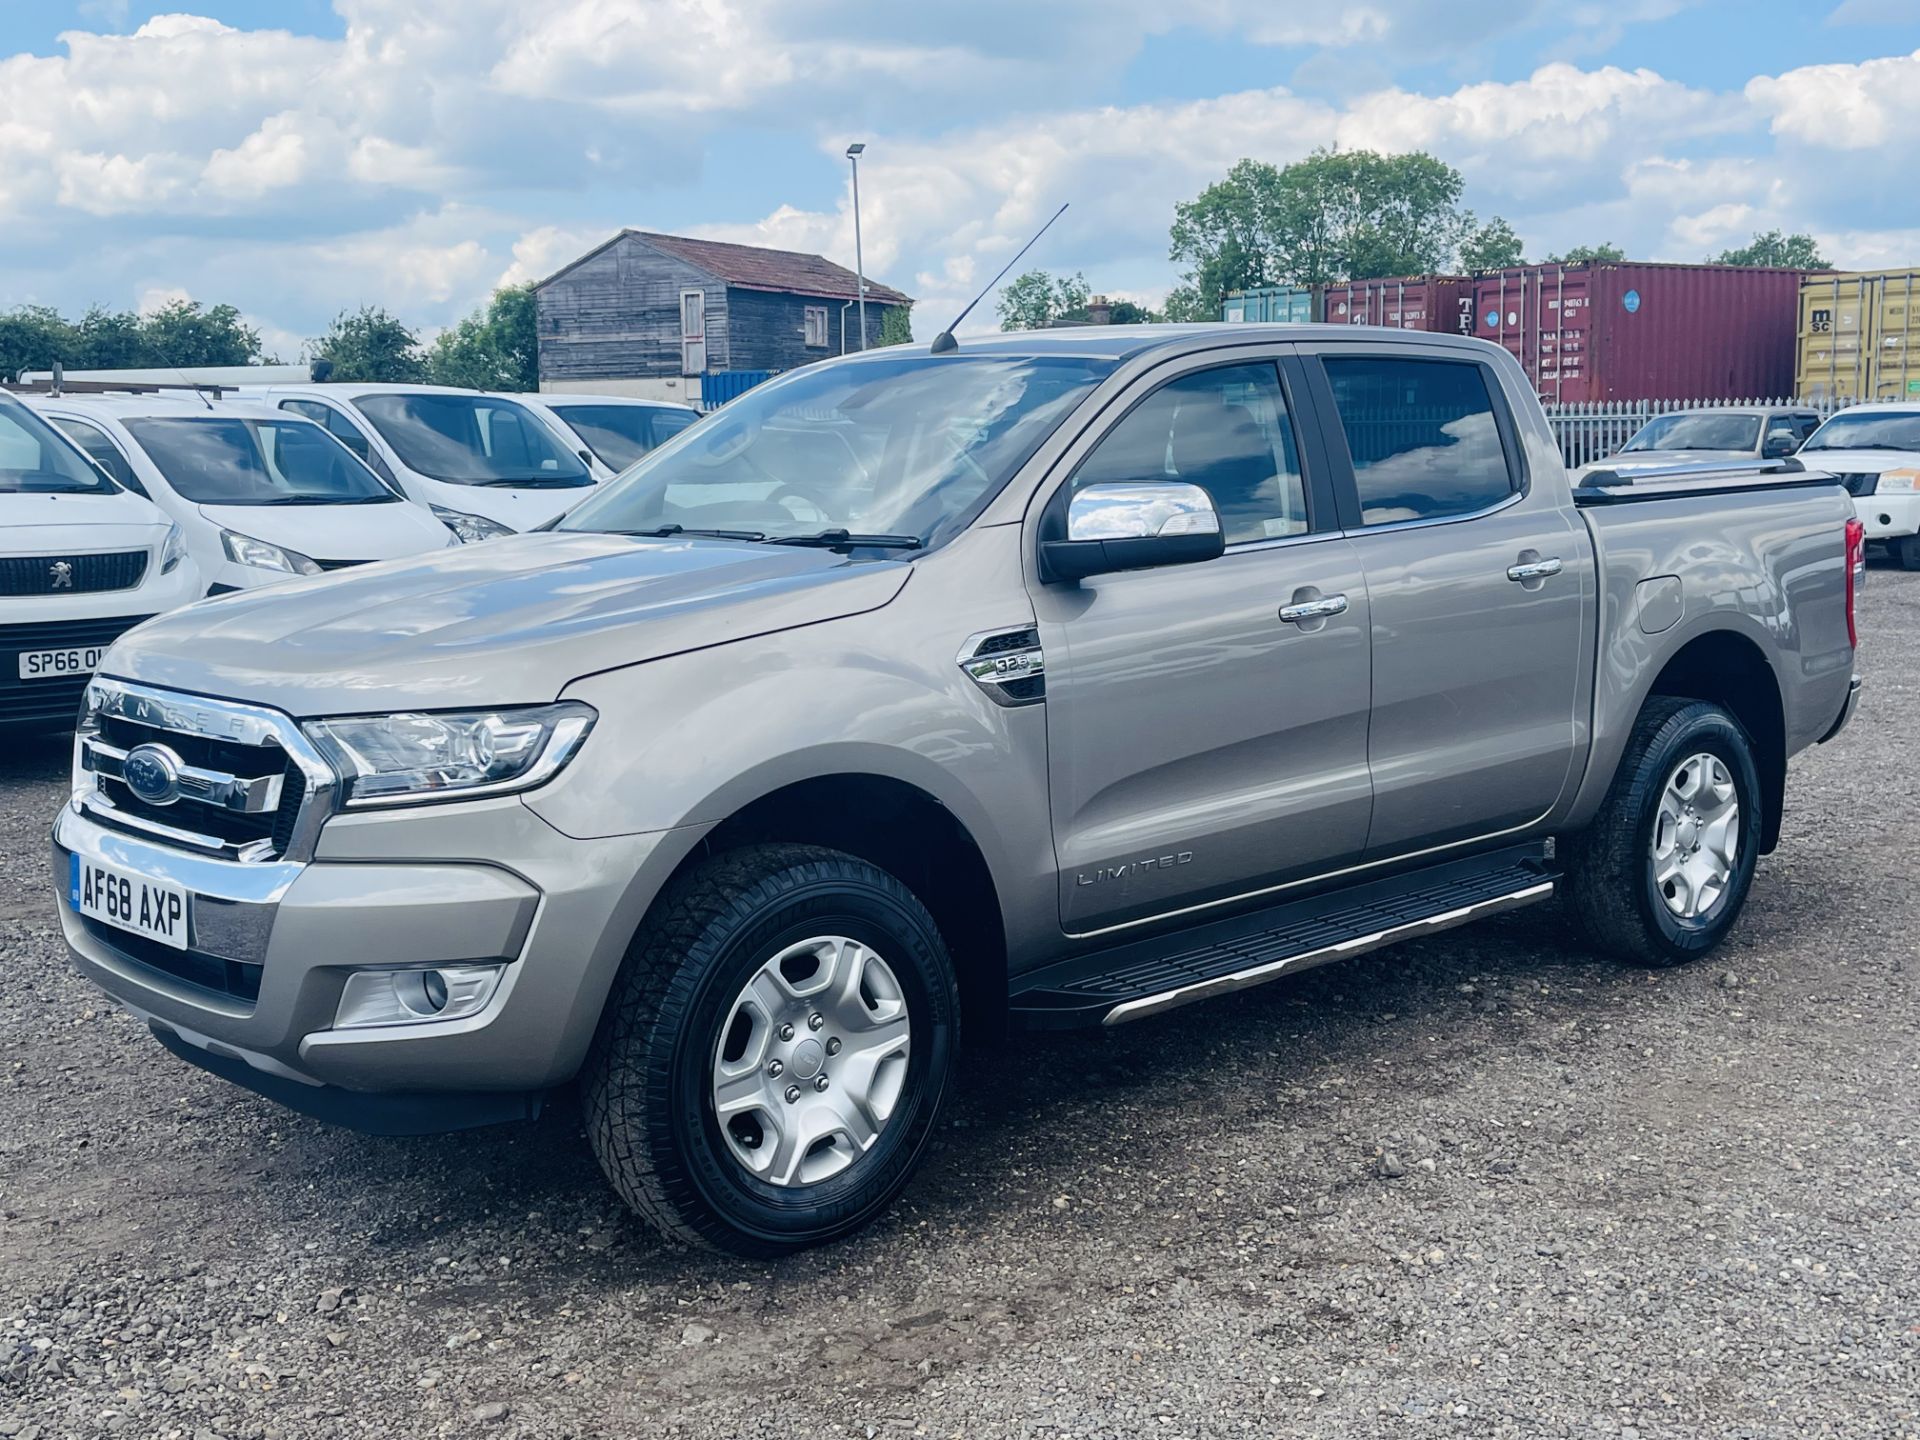 ** ON SALE ** Ford Ranger 3.2 TDCI Limited 2018 '68 Reg' Auto 4WD - Sat Nav - A/C - Euro 6 - Image 7 of 35